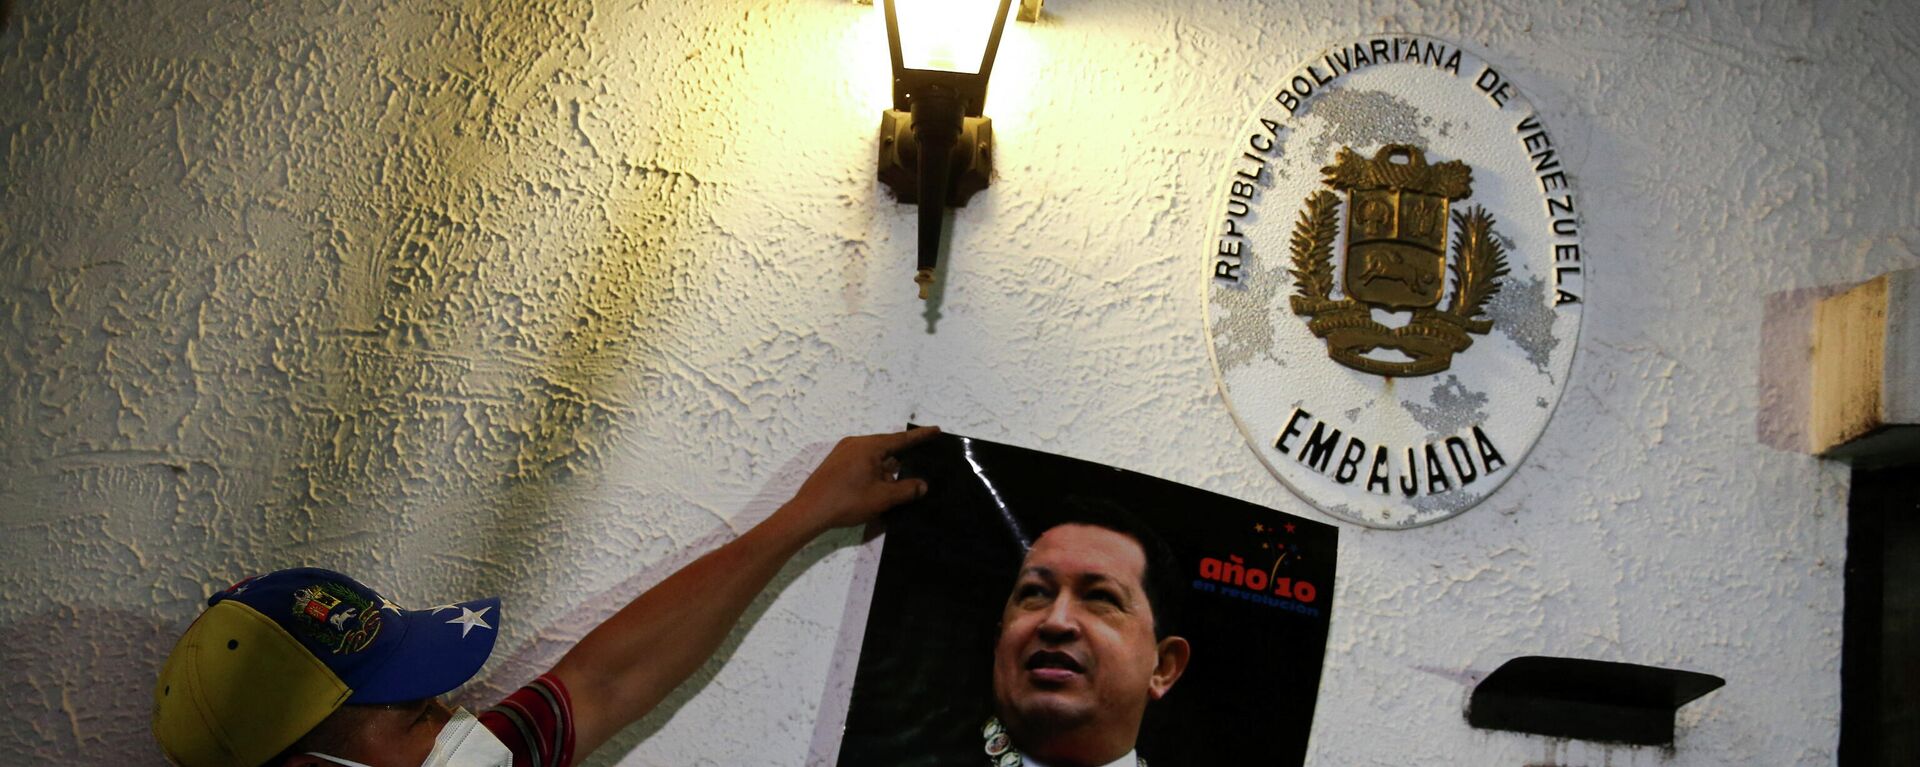 A former employee displays a picture of late former Venezuelan president Hugo Chavez as activists participate in the recovery of the Venezuelan embassy, which had been closed since 2009, in Tegucigalpa, Honduras January 27, 2022.  - Sputnik International, 1920, 28.01.2022